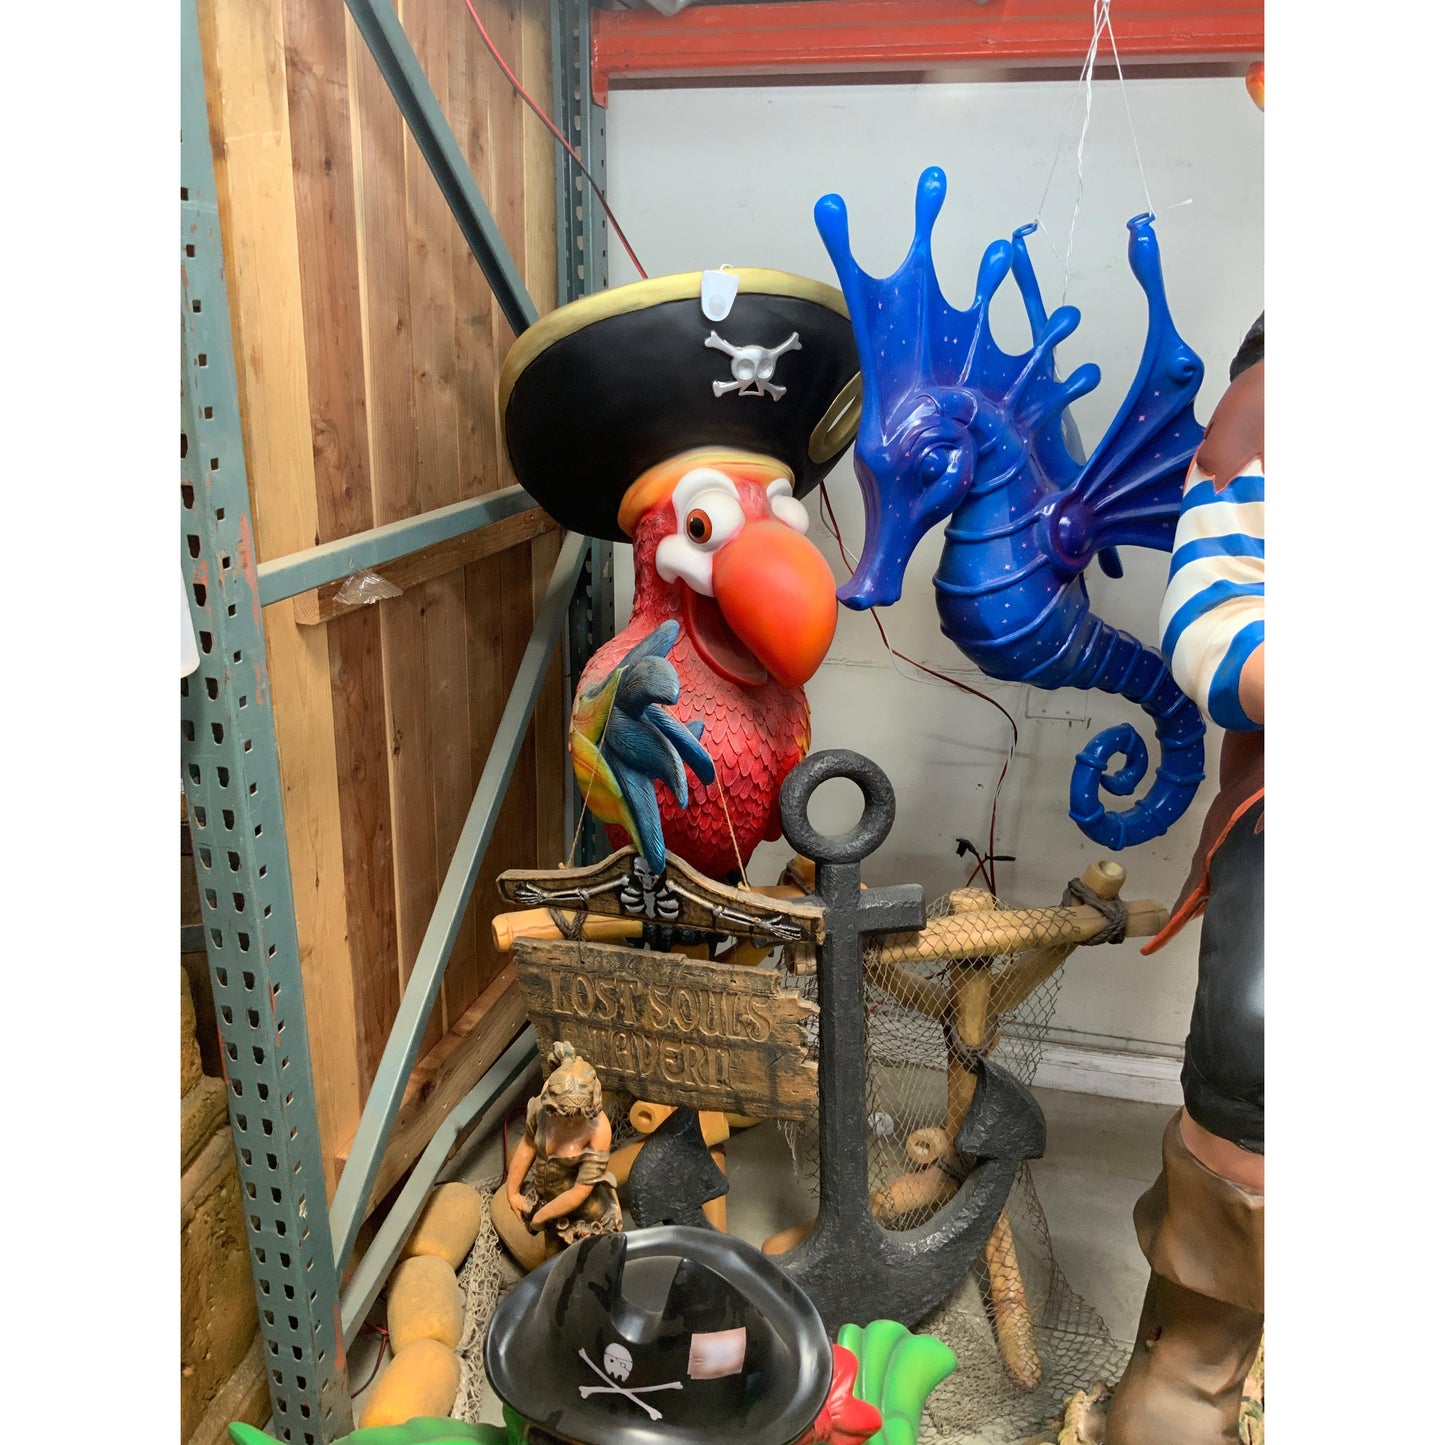 Comic Pirate Parrot Statue On Stand - LM Treasures Prop Rentals 